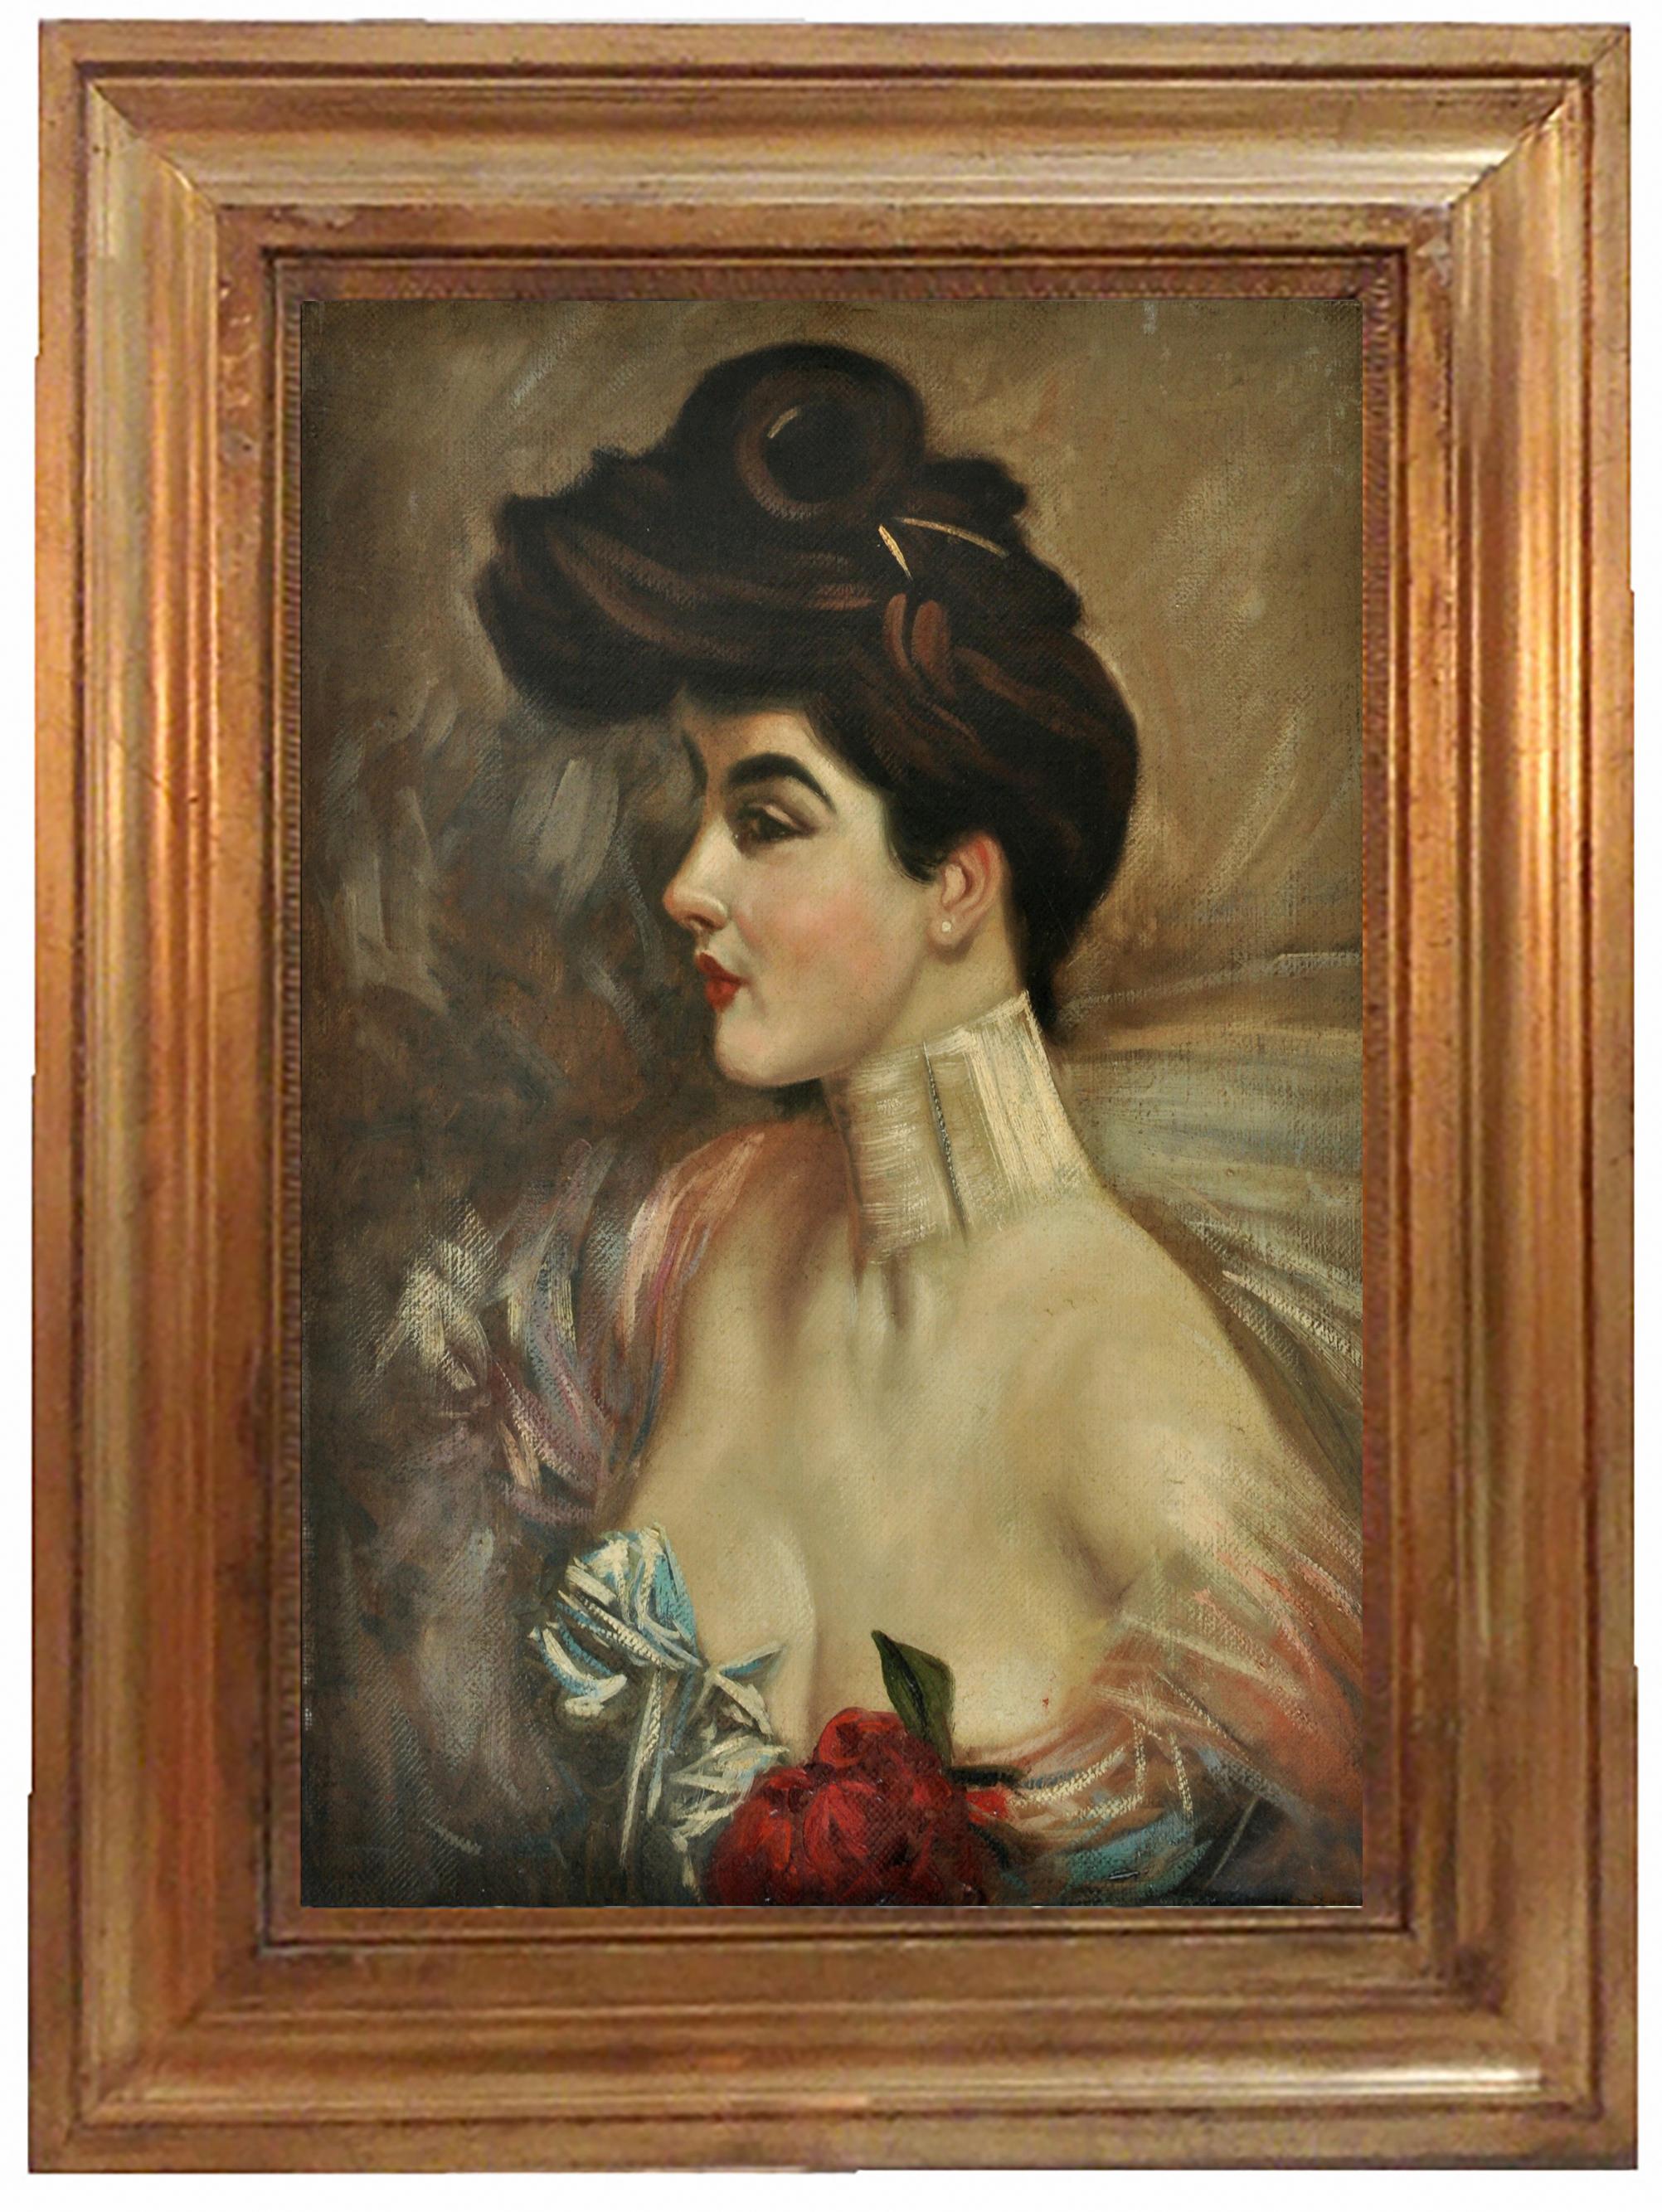 Ciro De Rosa Portrait Painting - LADY'S PORTRAIT - In the Manner of G. Boldini - Italian Oil on Canvas Painting